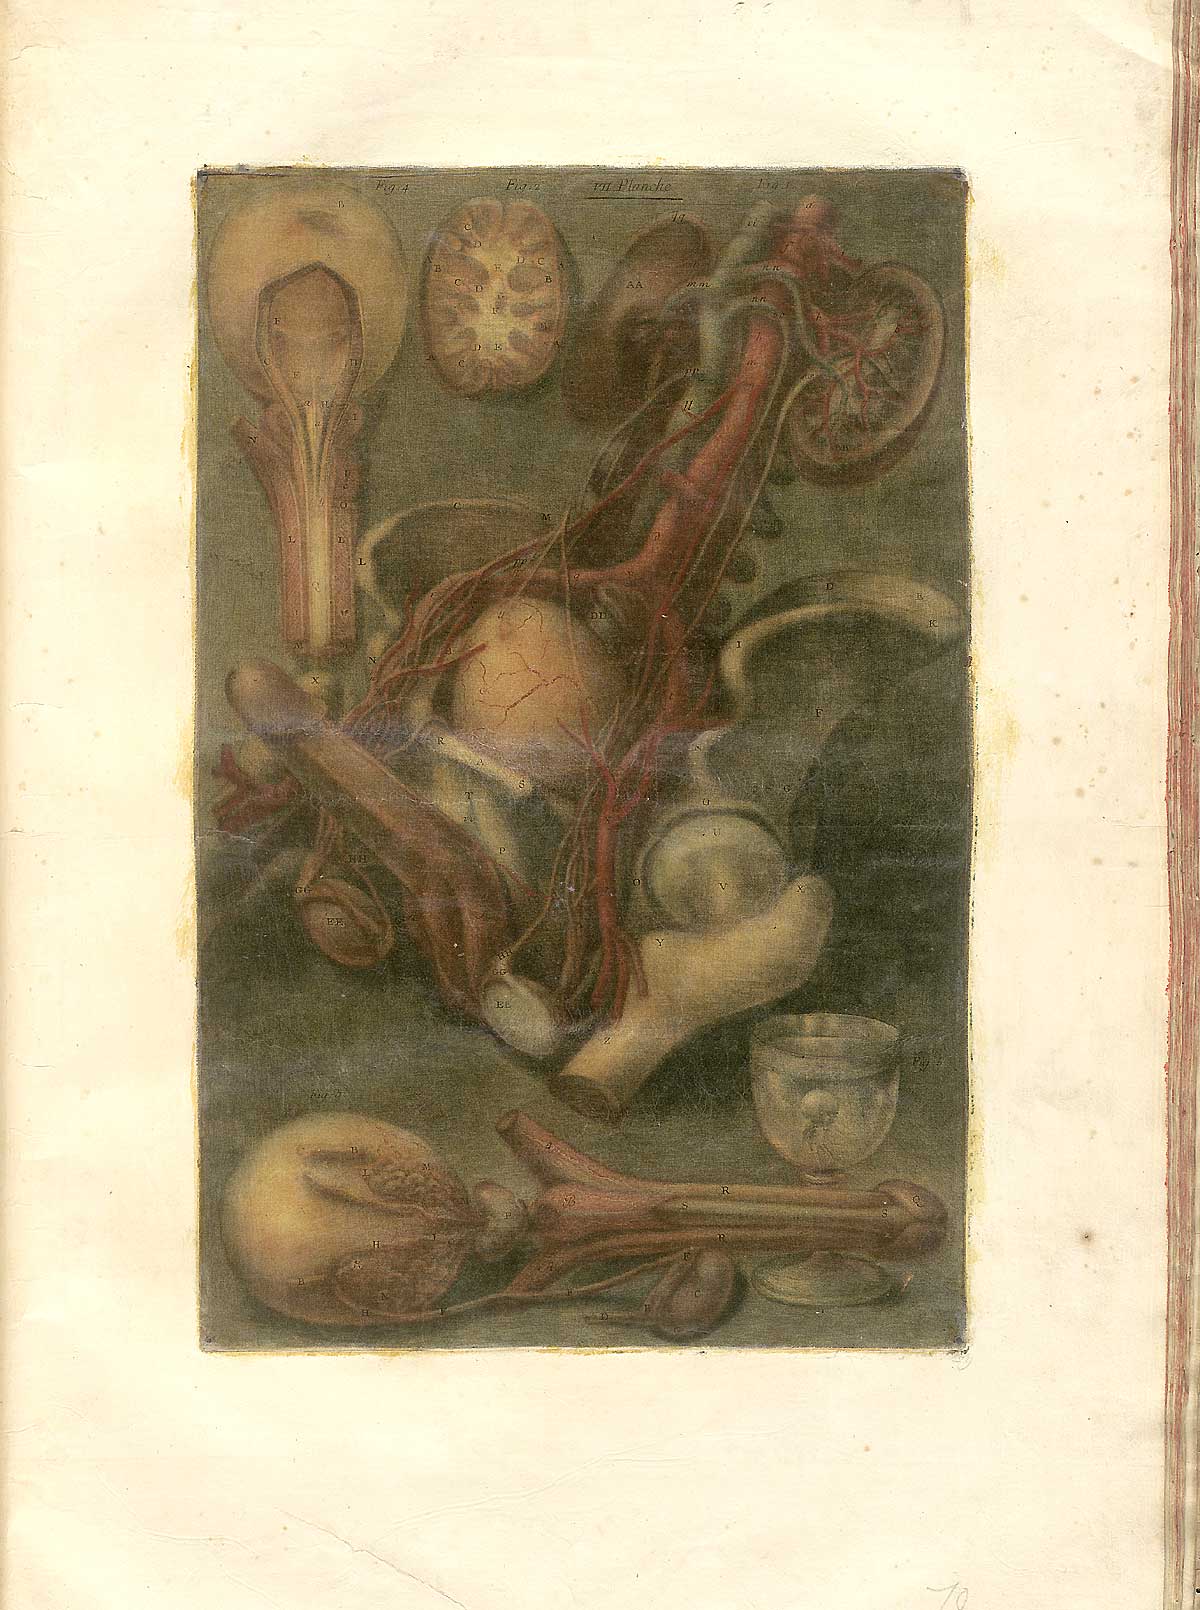 Color mezzotint of several disembodied male urogenital systems; in the center is an entire system including the kidneys, renal veins and arteries, prostate, bladder, pelvis, erect penis and testes; below along the bottom is an erect penis with skin removed, prostate, testicle, and a wine glass containing a homunculus; at the top left is a cross section of a kidney and a prostate gland; from Jacques Fabian Gautier d’Agoty’s Anatomie générale des viscères en situation, NLM Call no.: WZ 260 G283c 1745.